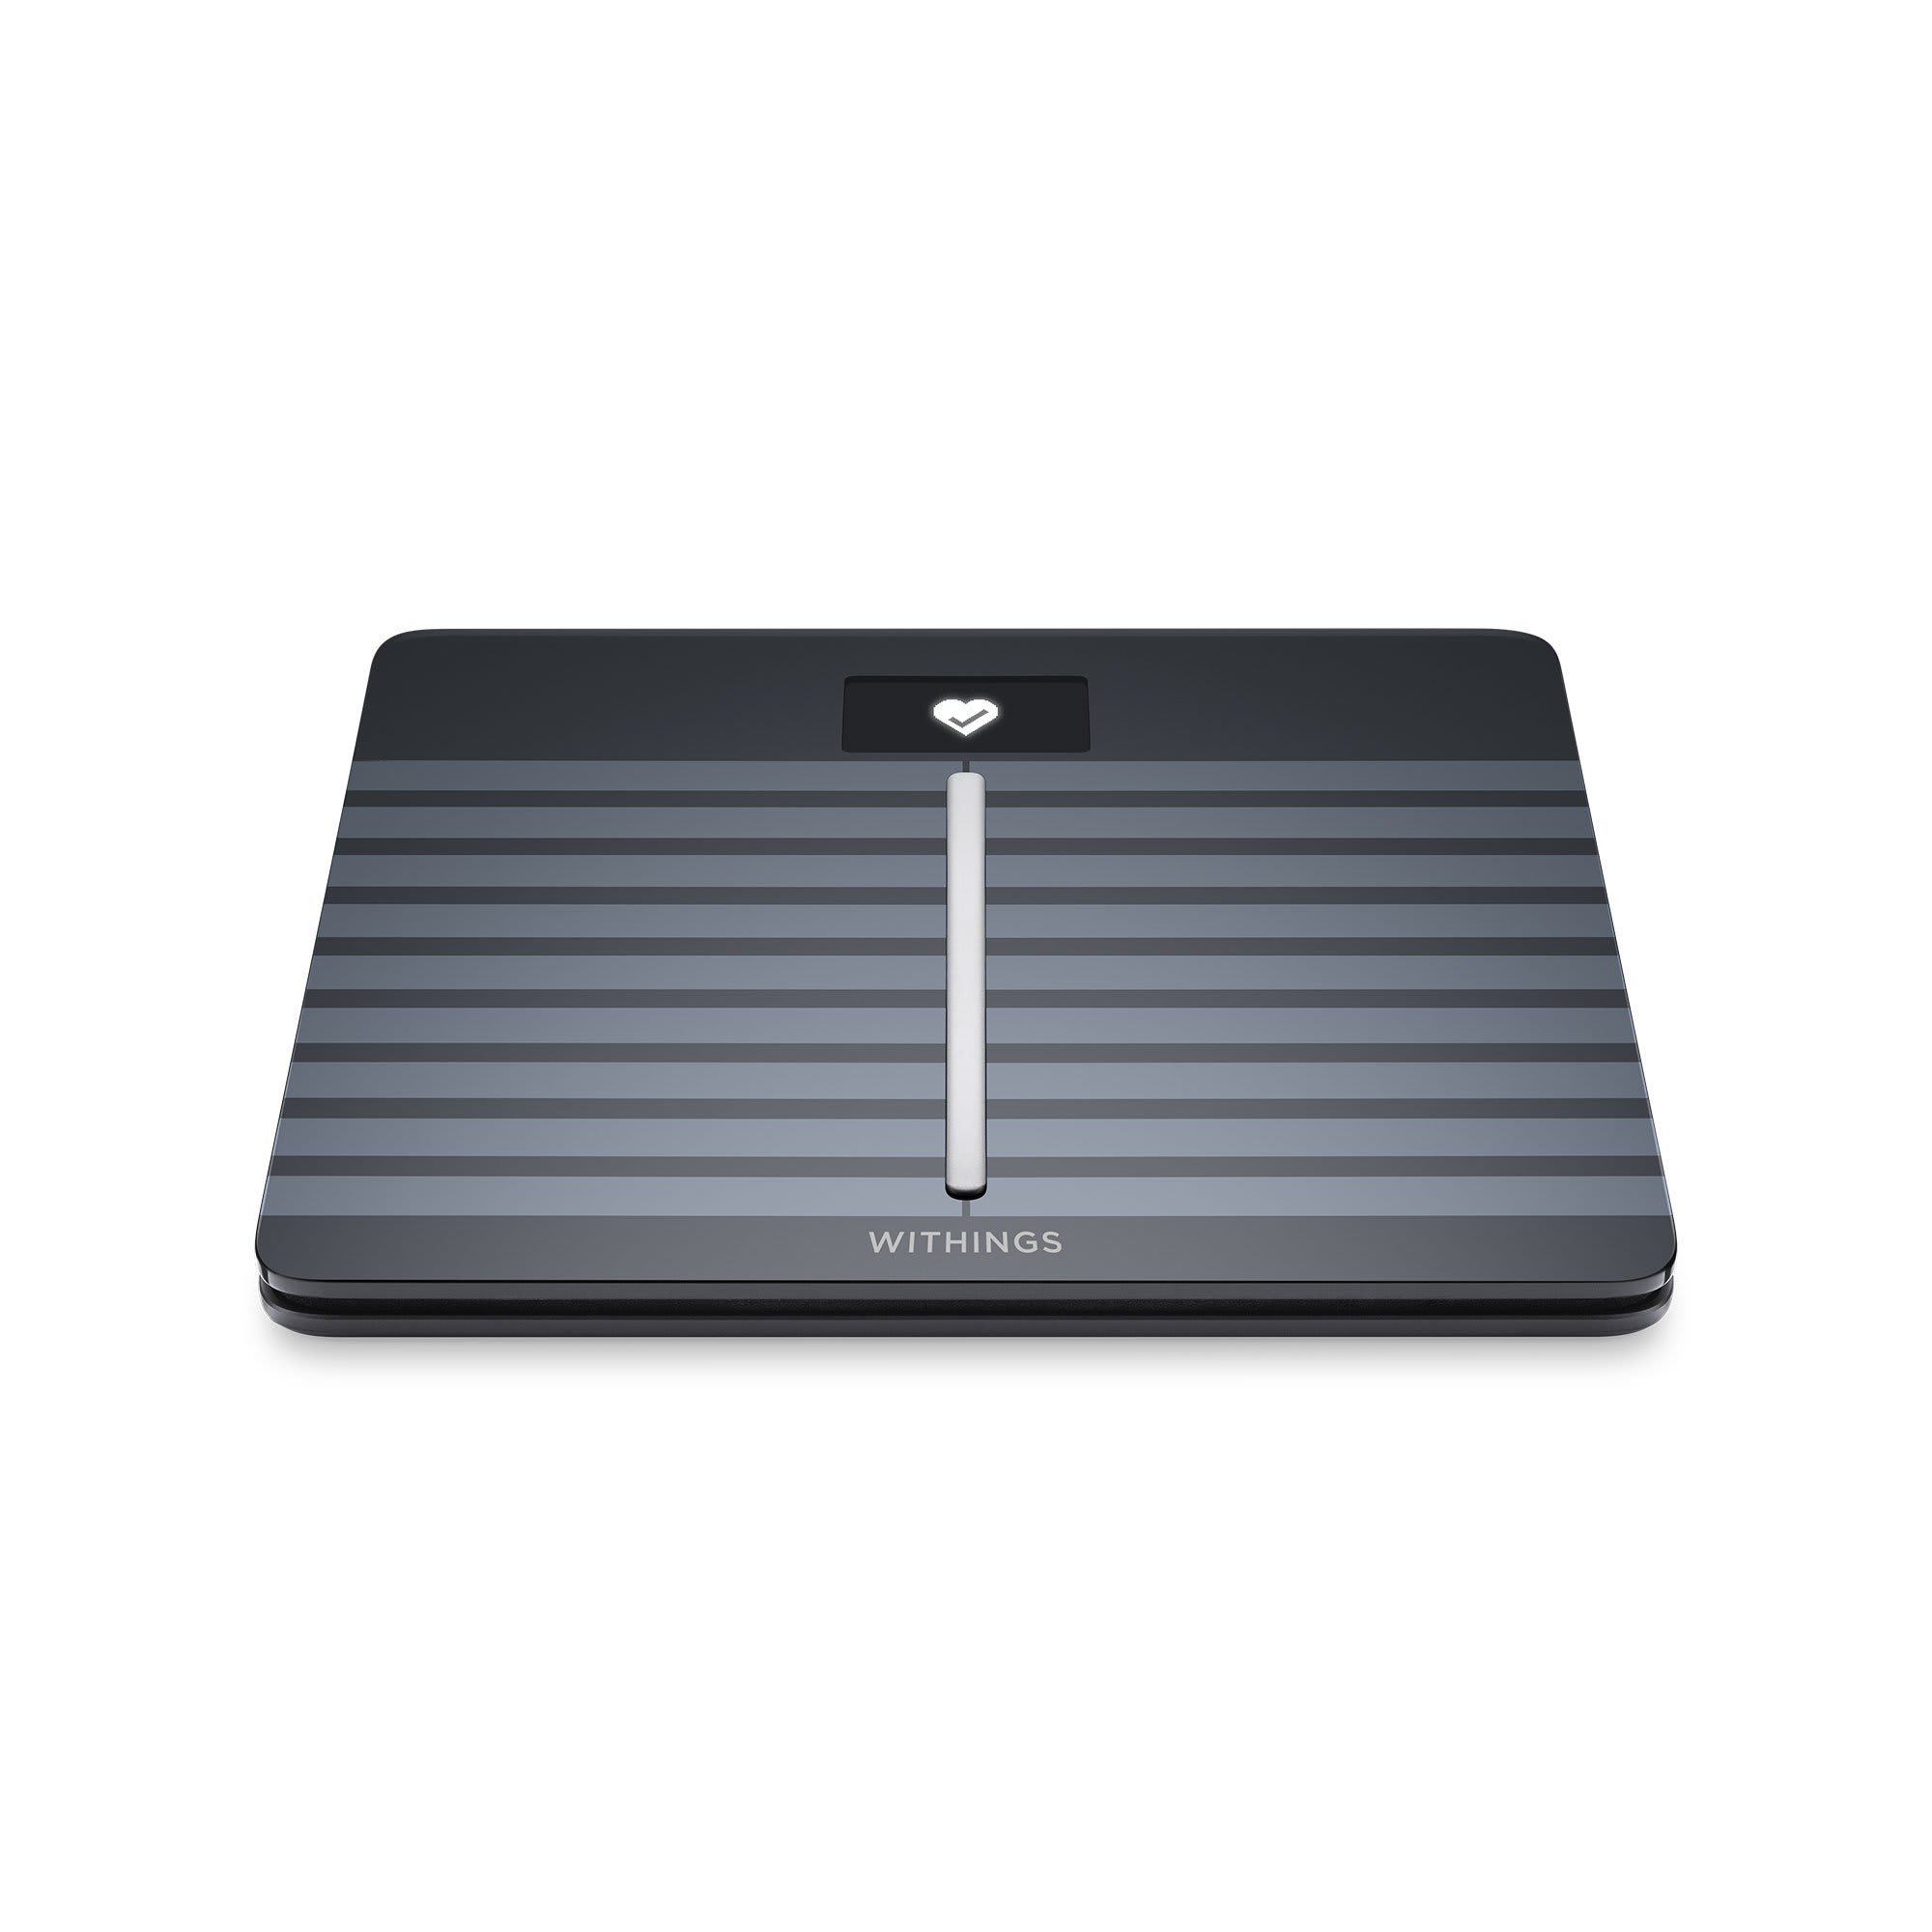 Withings Body Comp Smart Scale Uses Algorithms and Sensors to Give